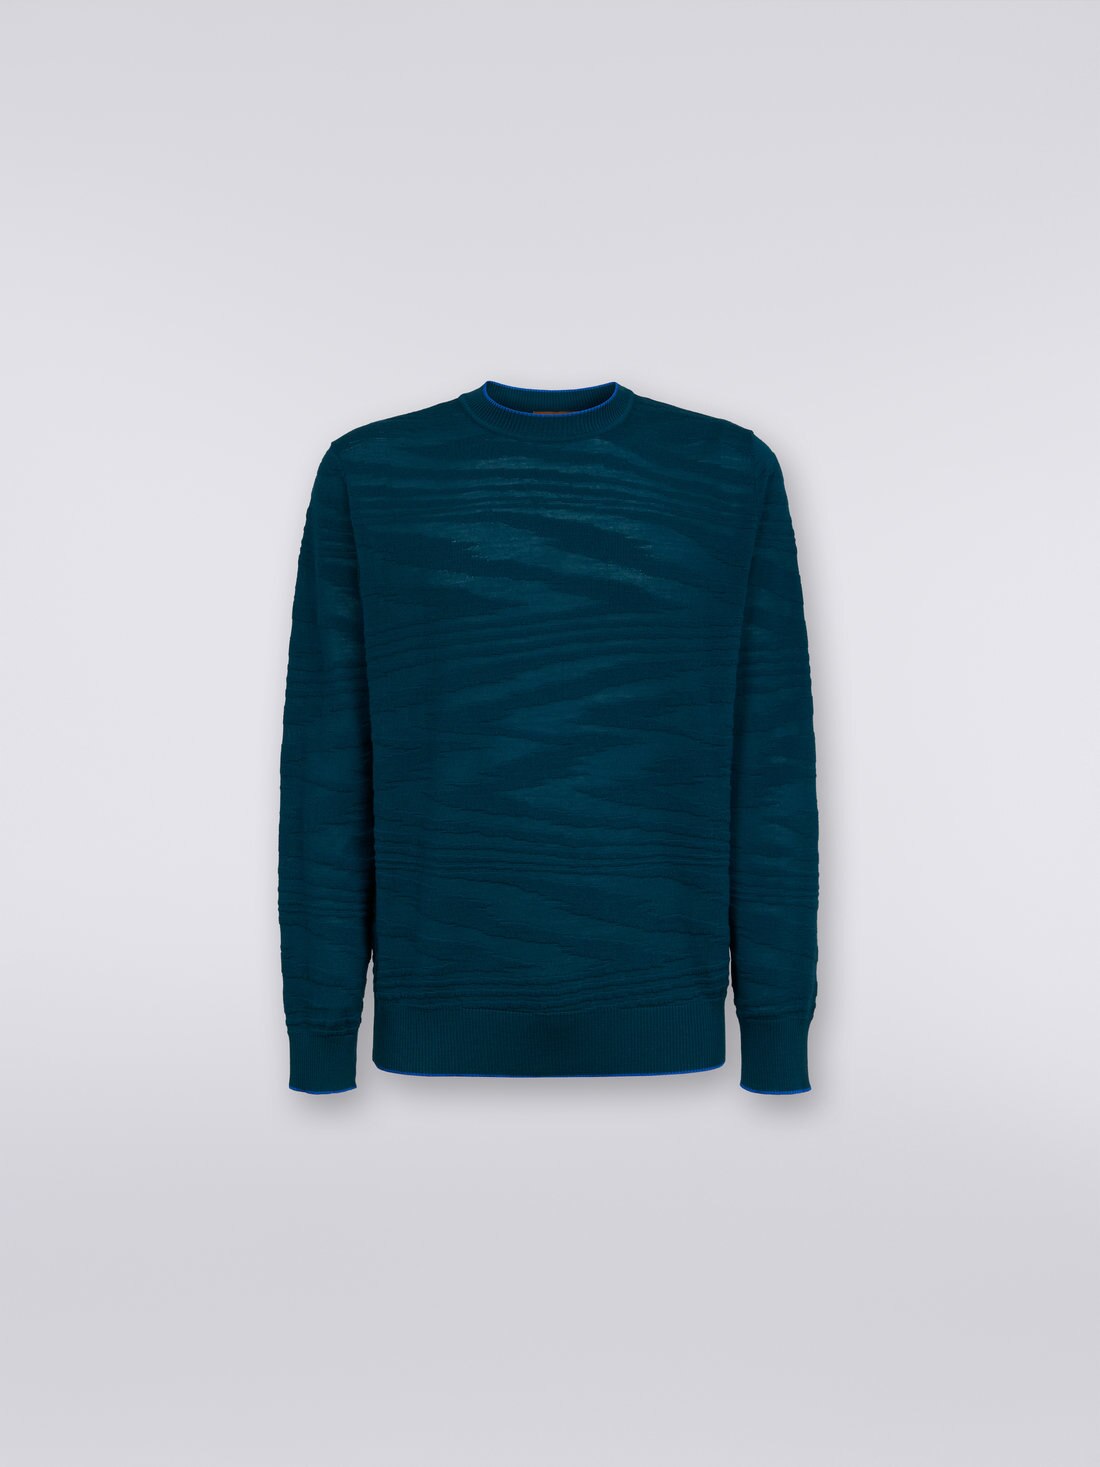 Embossed wool and viscose crew-neck pullover, Green  - UC23WN02BK021ZS611Q - 0